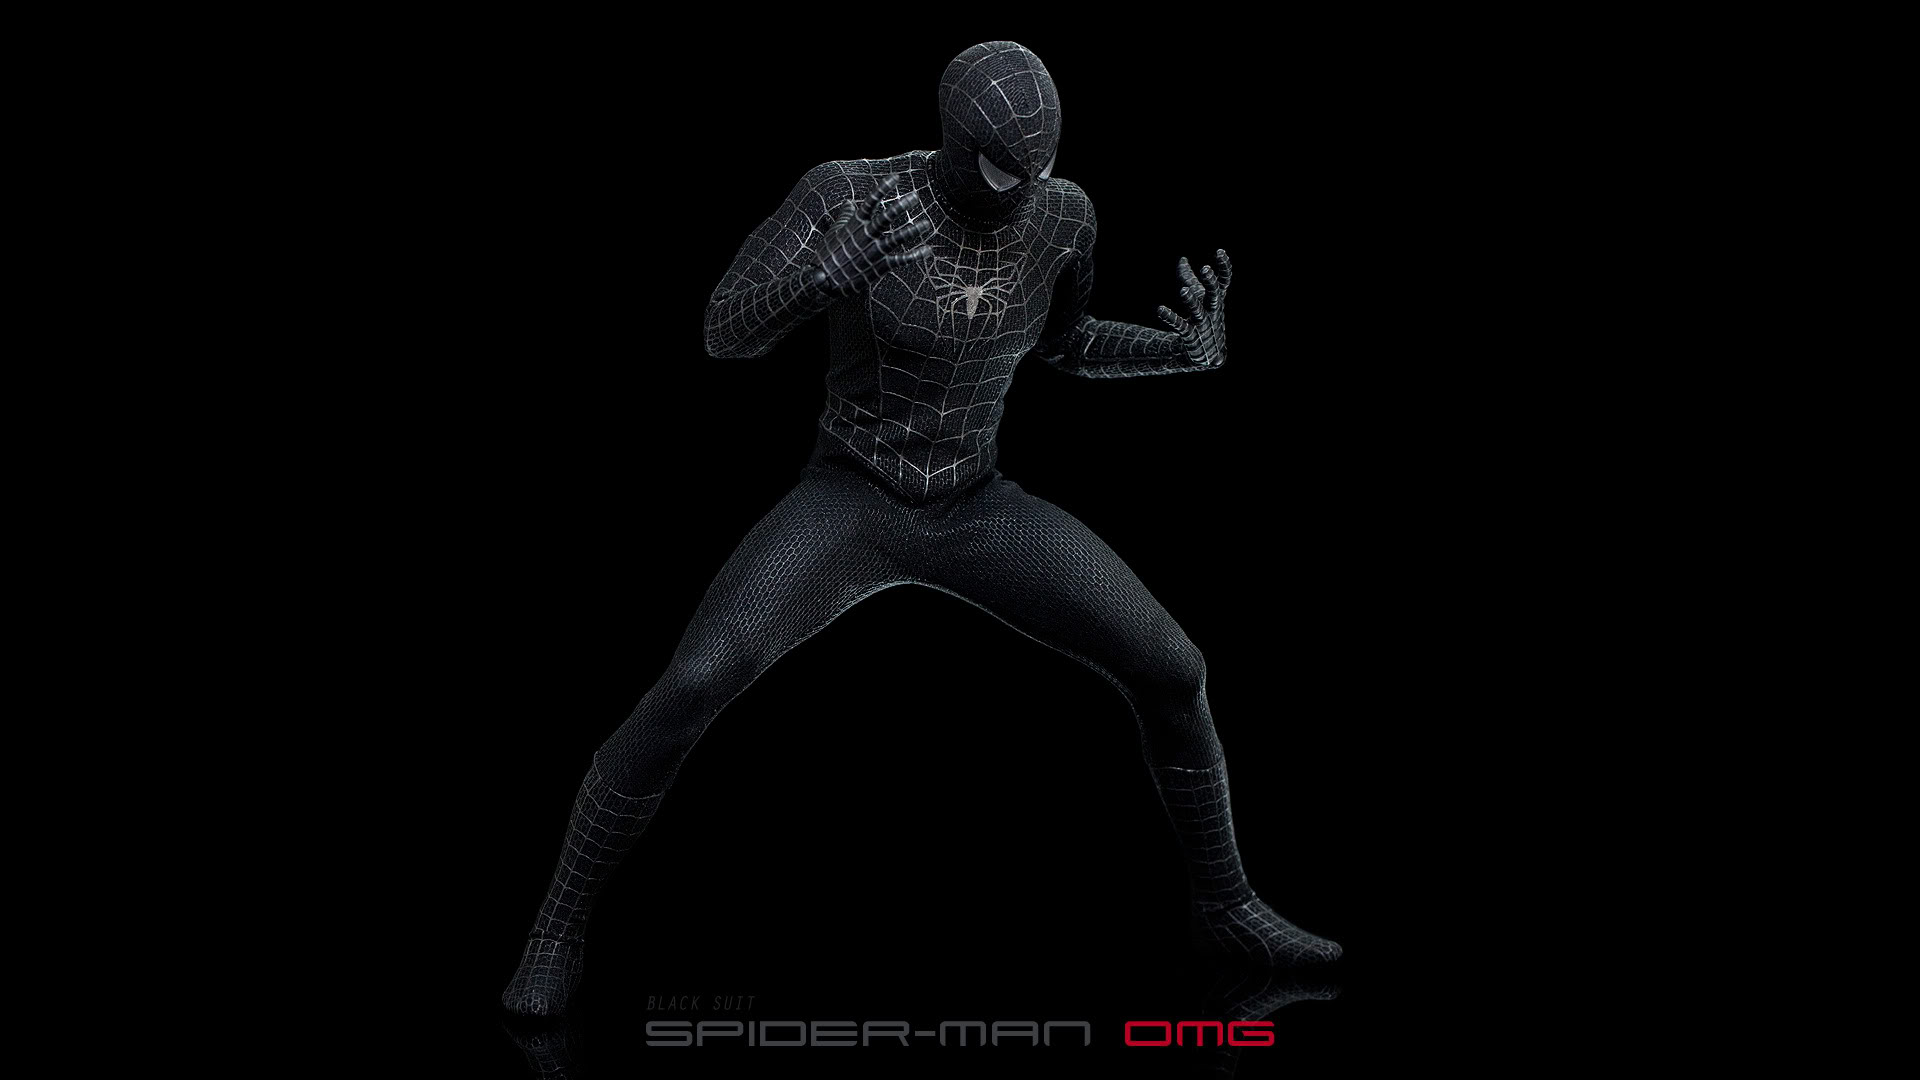 OMG's photo review Hot Toys Black-suit Spider-man